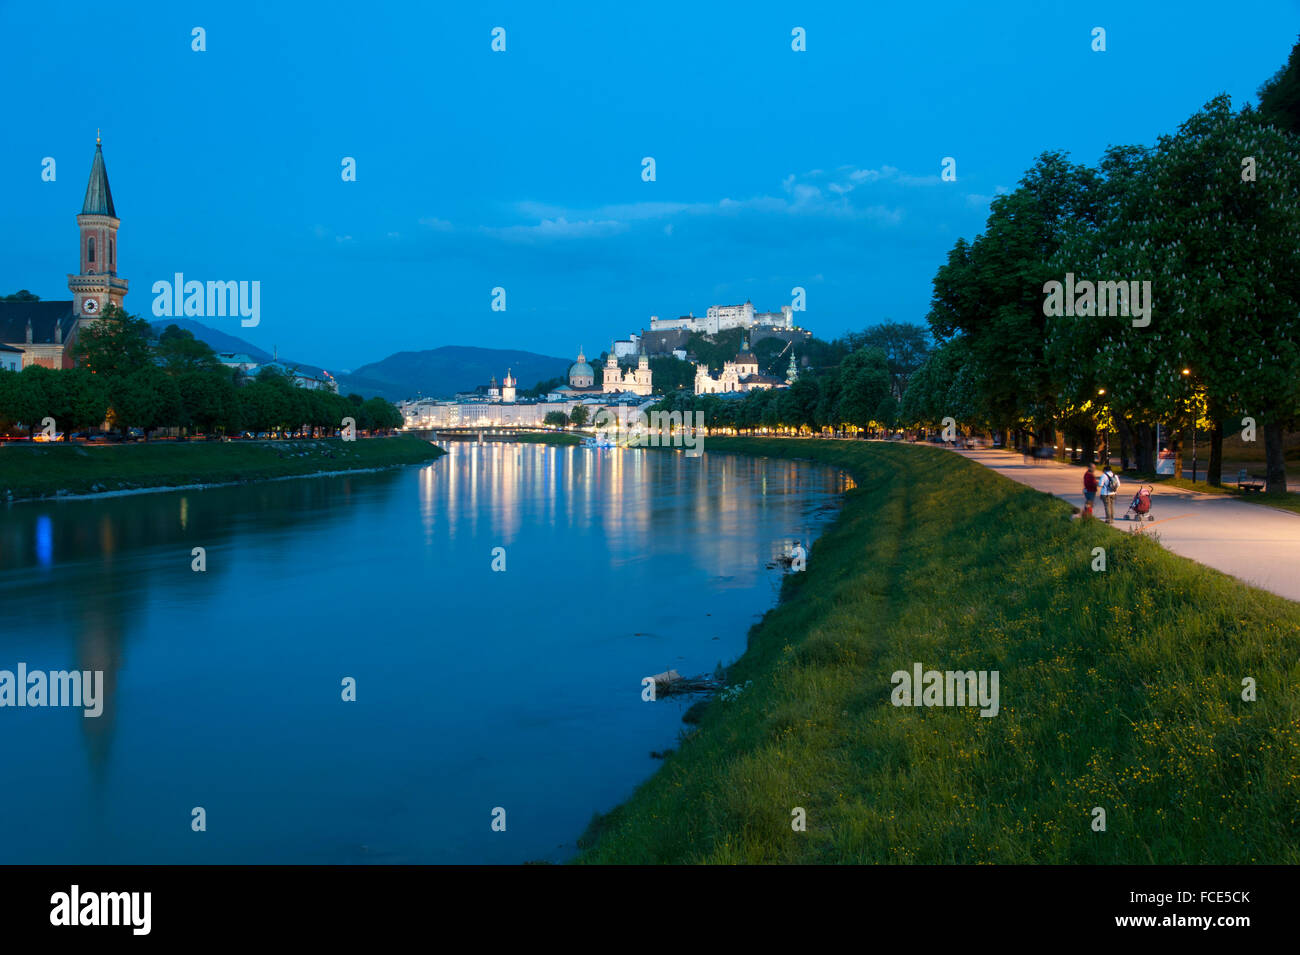 the historic center of the city of Salzburg, a UNESCO World Heritage Site, Austria Stock Photo